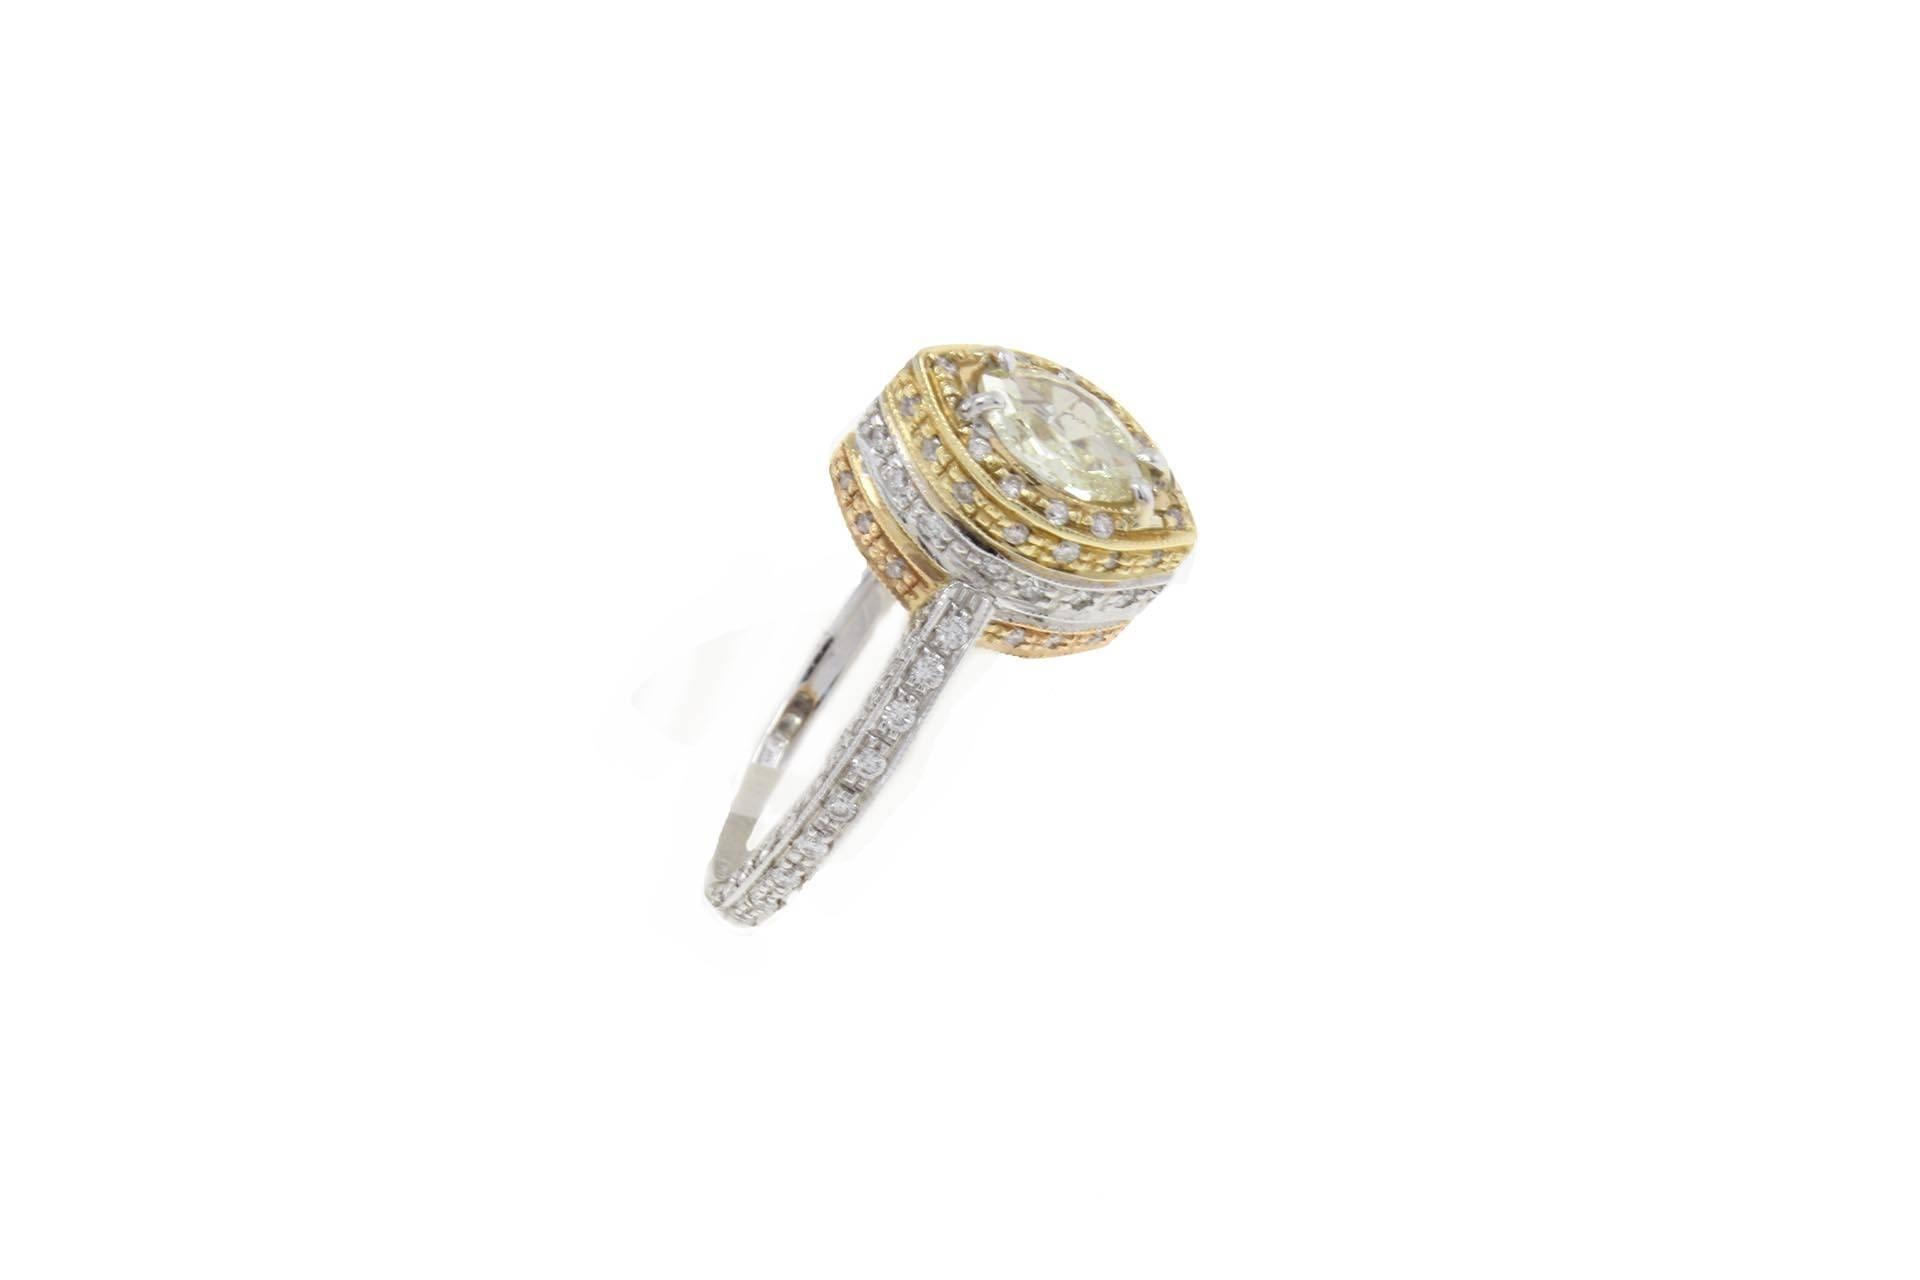 shipping policy: 
No additional costs will be added to this order.
Shipping costs will be totally covered by the seller (customs duties included). 

Shiny ring in 18 kt rose gold, white gold and yellow gold. This ring is mounted with diamonds